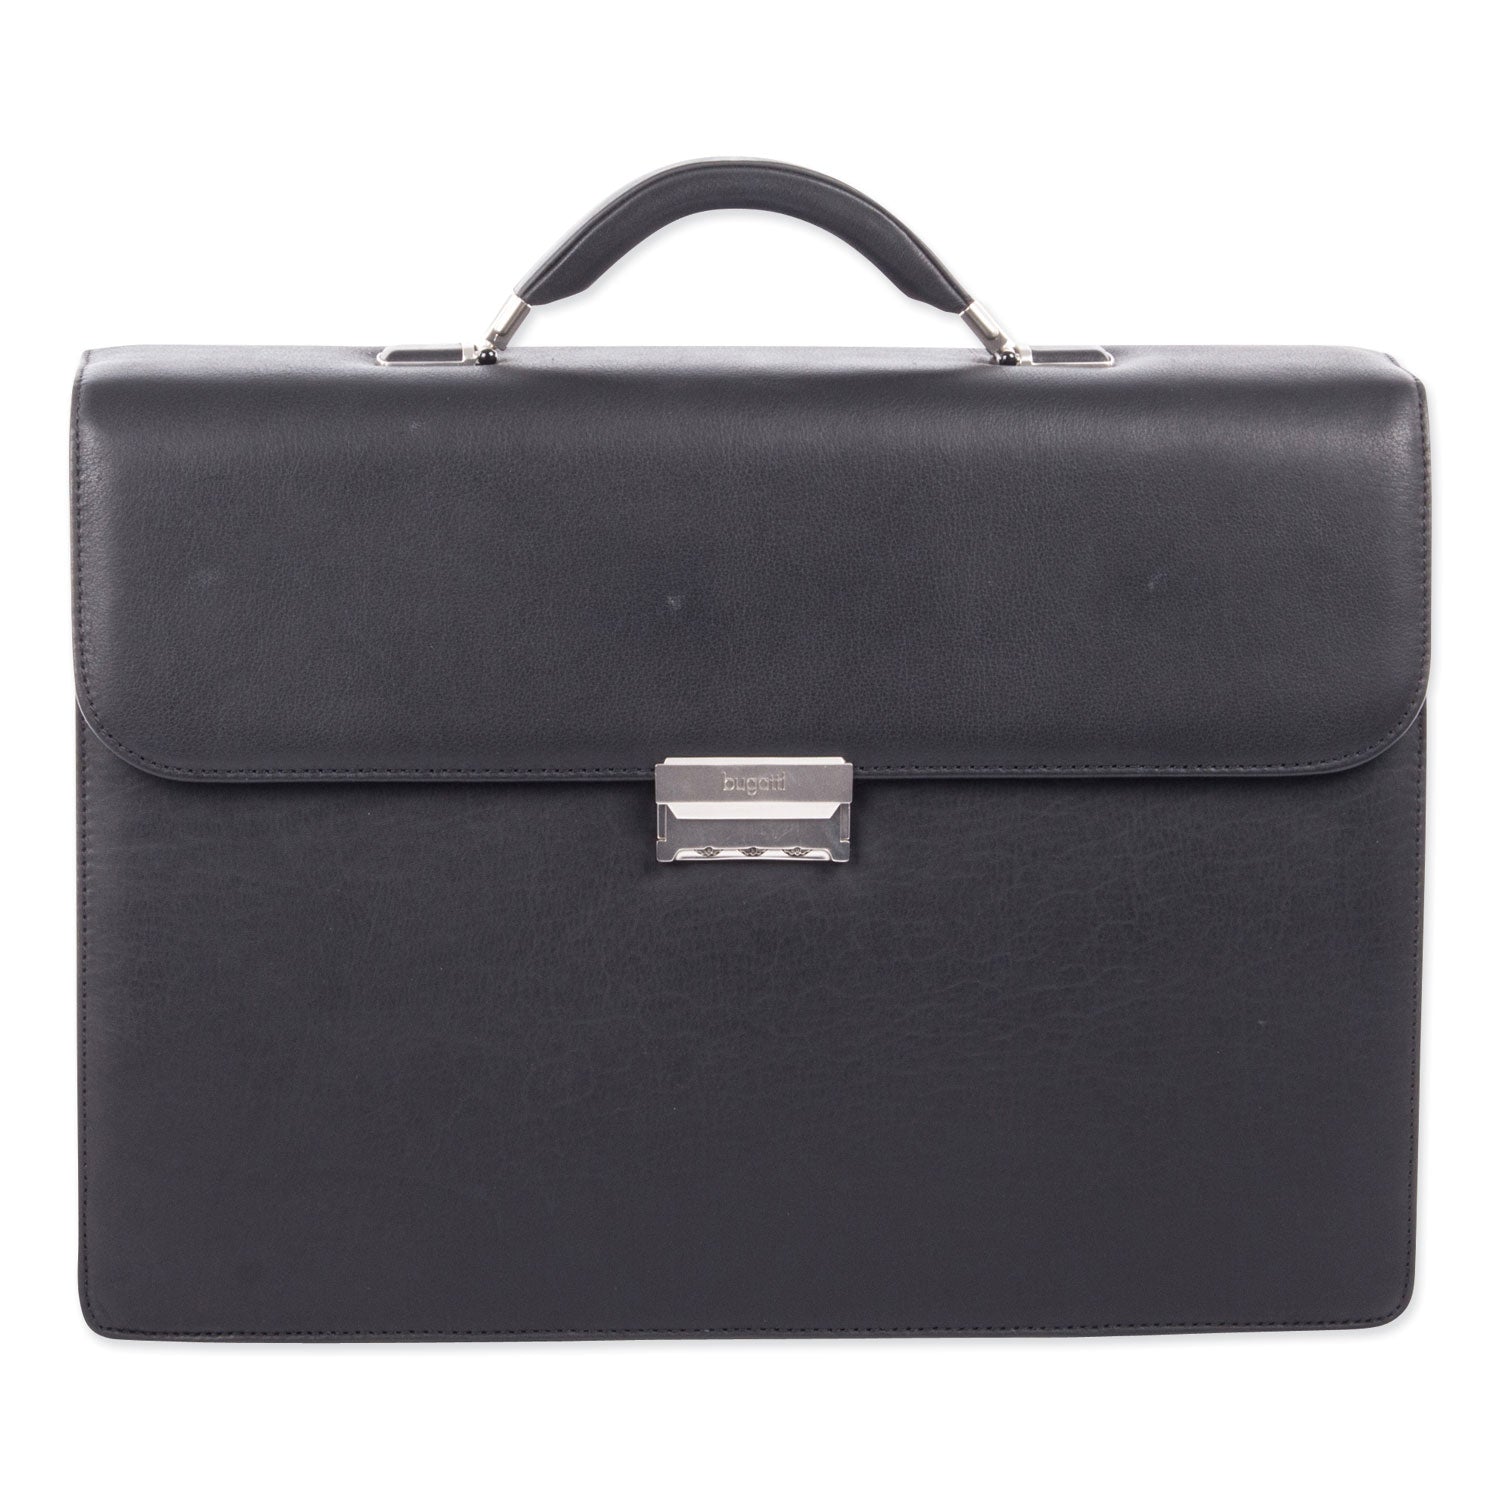 milestone-briefcase-fits-devices-up-to-156-leather-5-x-5-x-12-black_swz49545801sm - 3